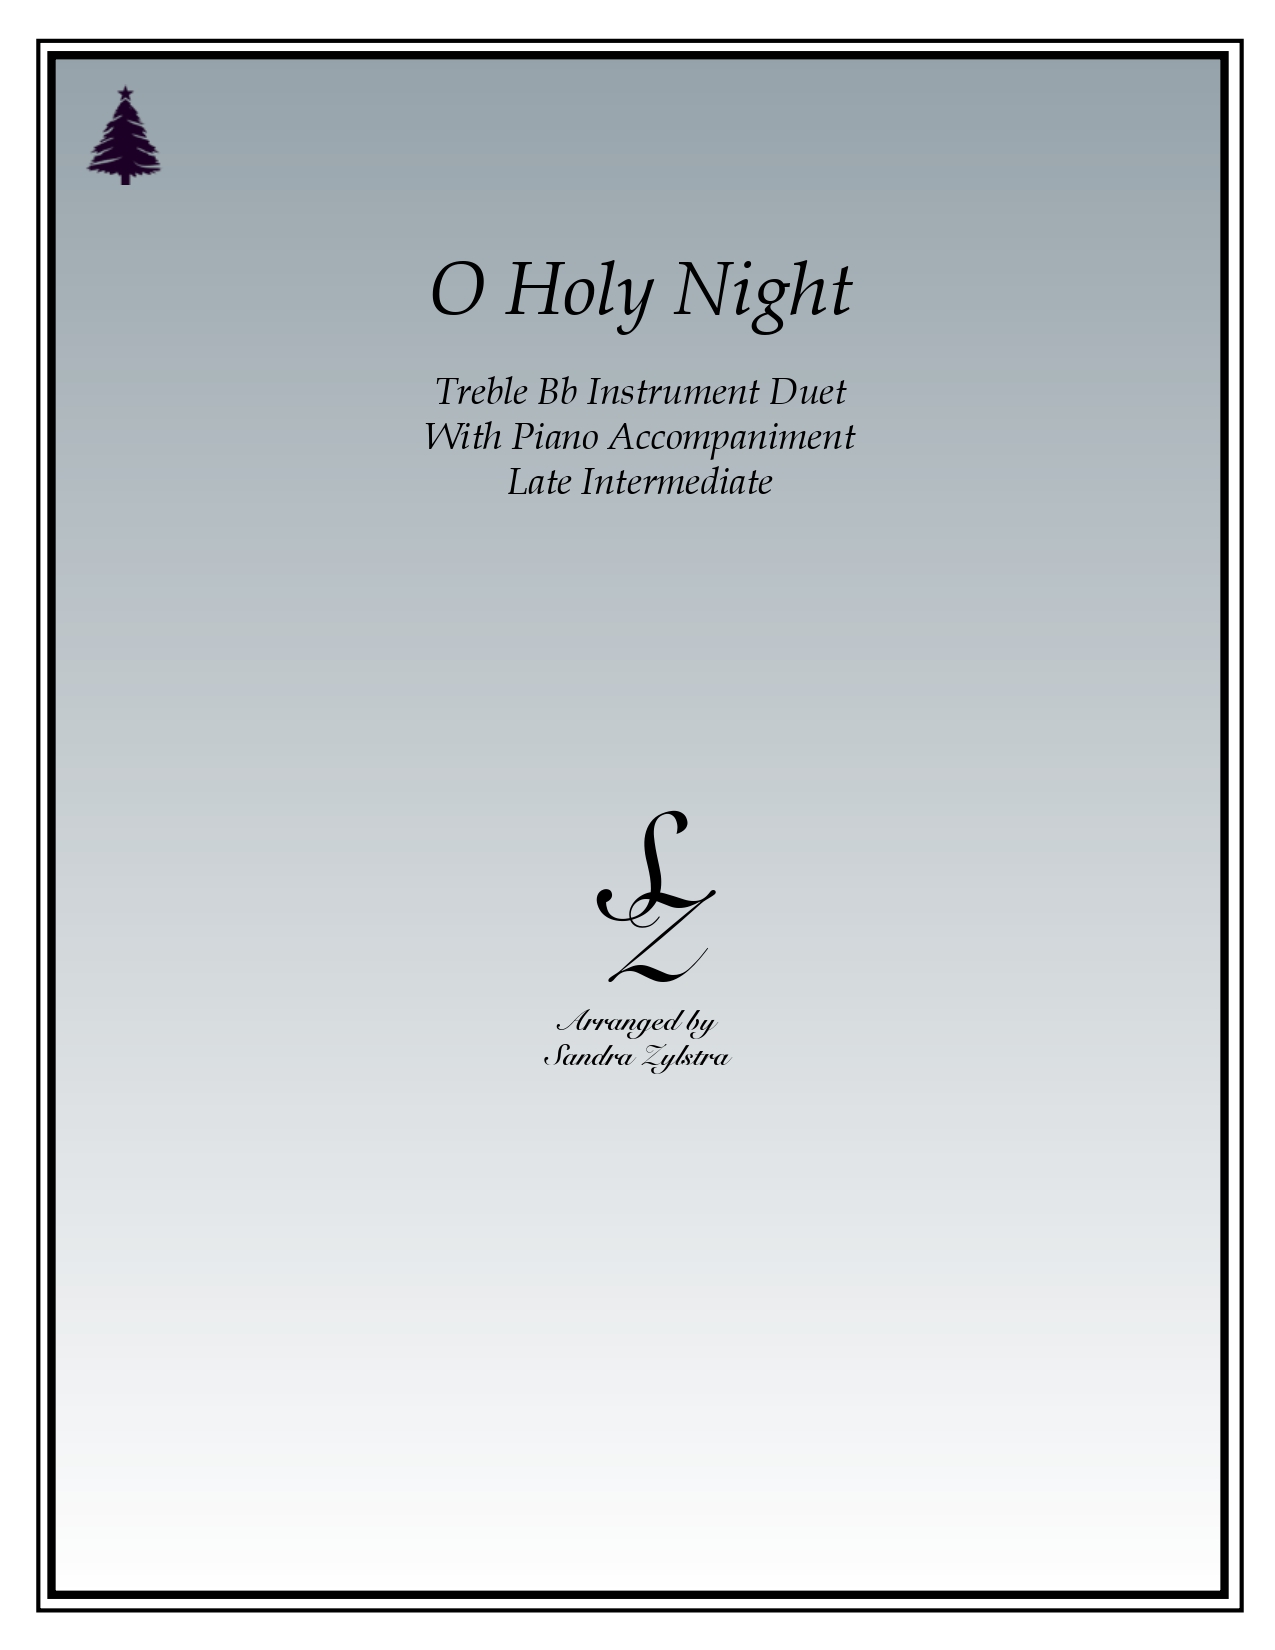 O Holy Night Bb instrument duet part cover page 00011